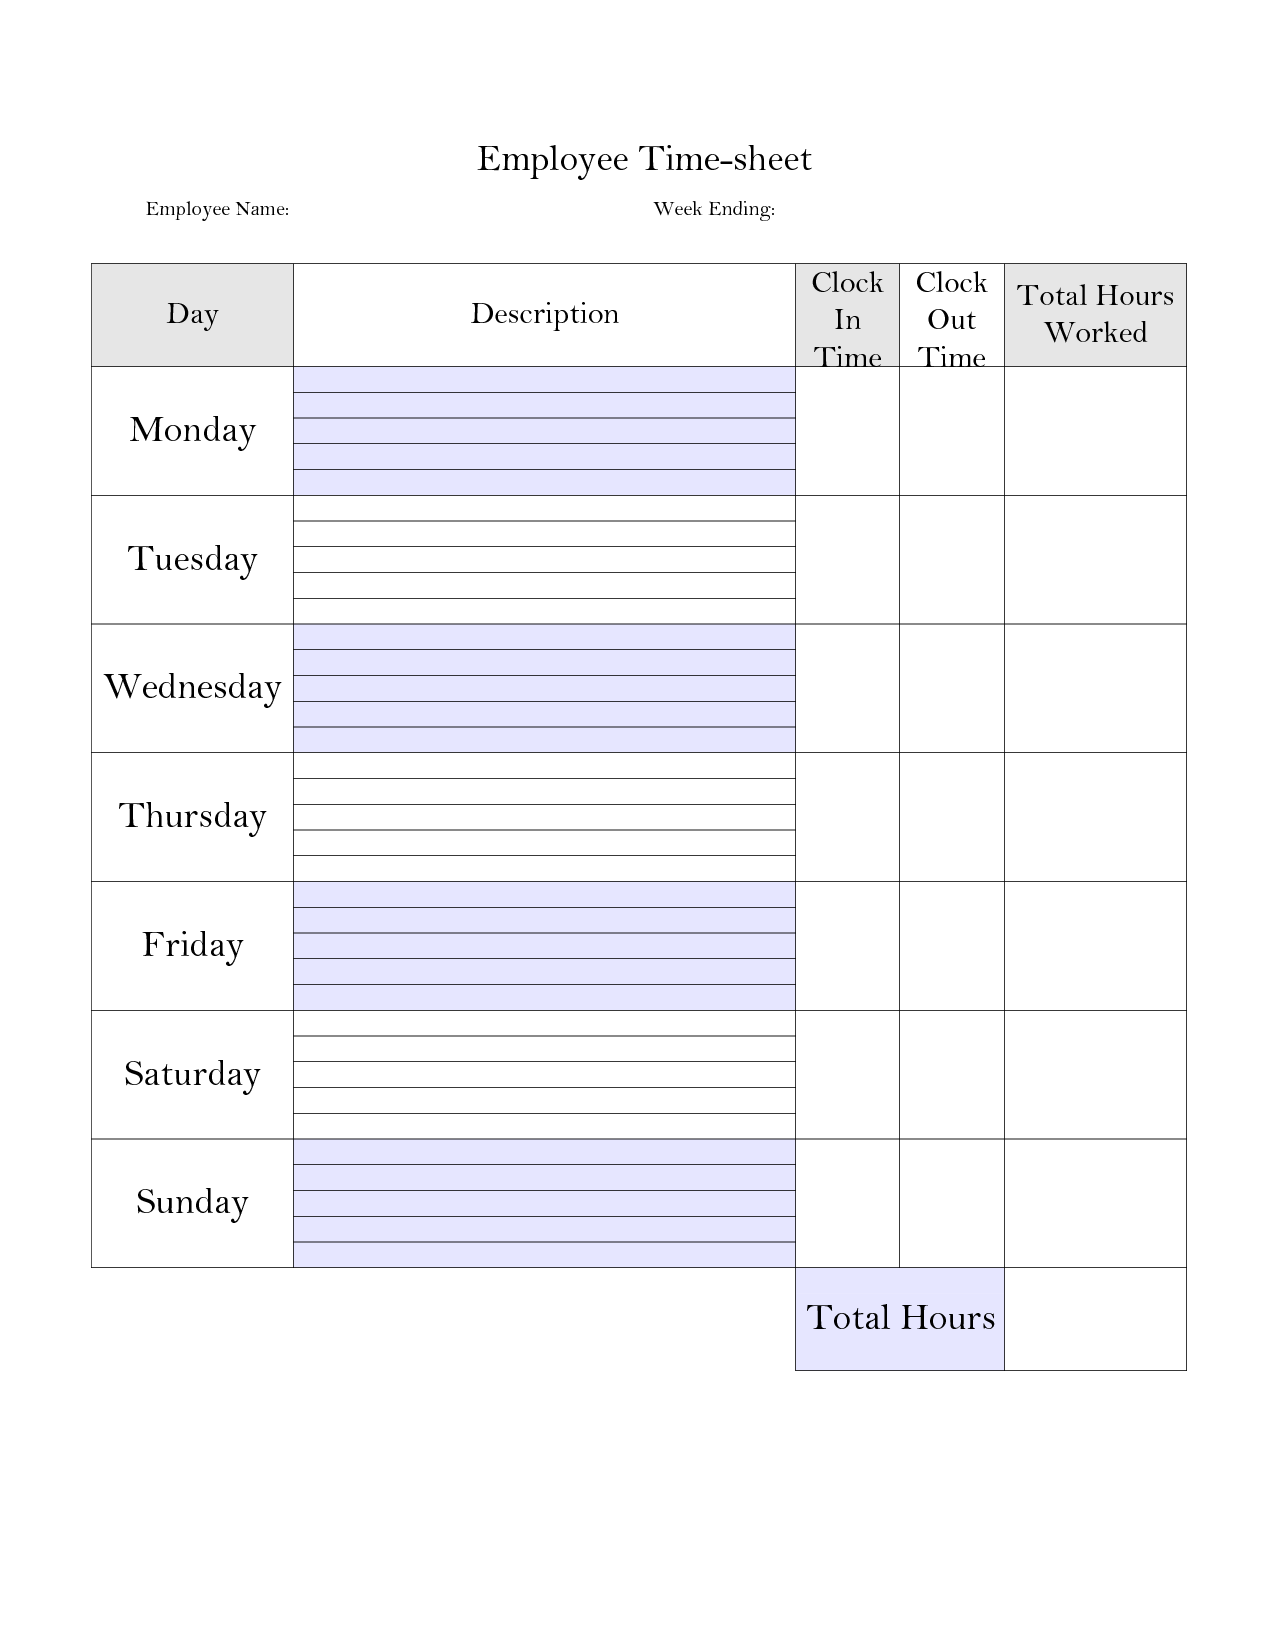 Free Printable Weekly Employee Time Sheets